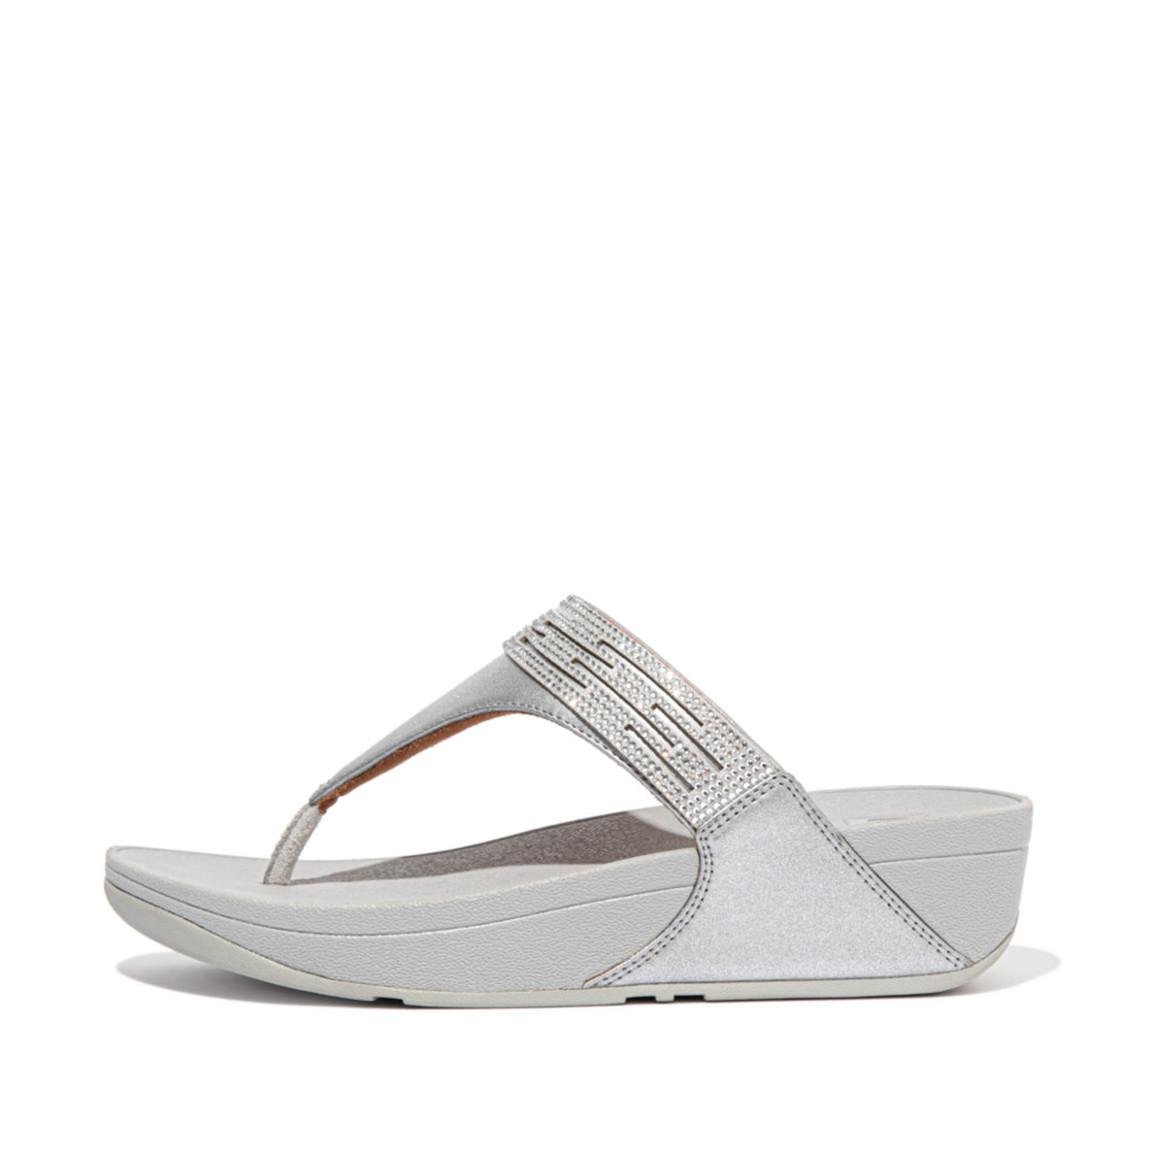 Lasercrystal Leather Toe Post Sandals